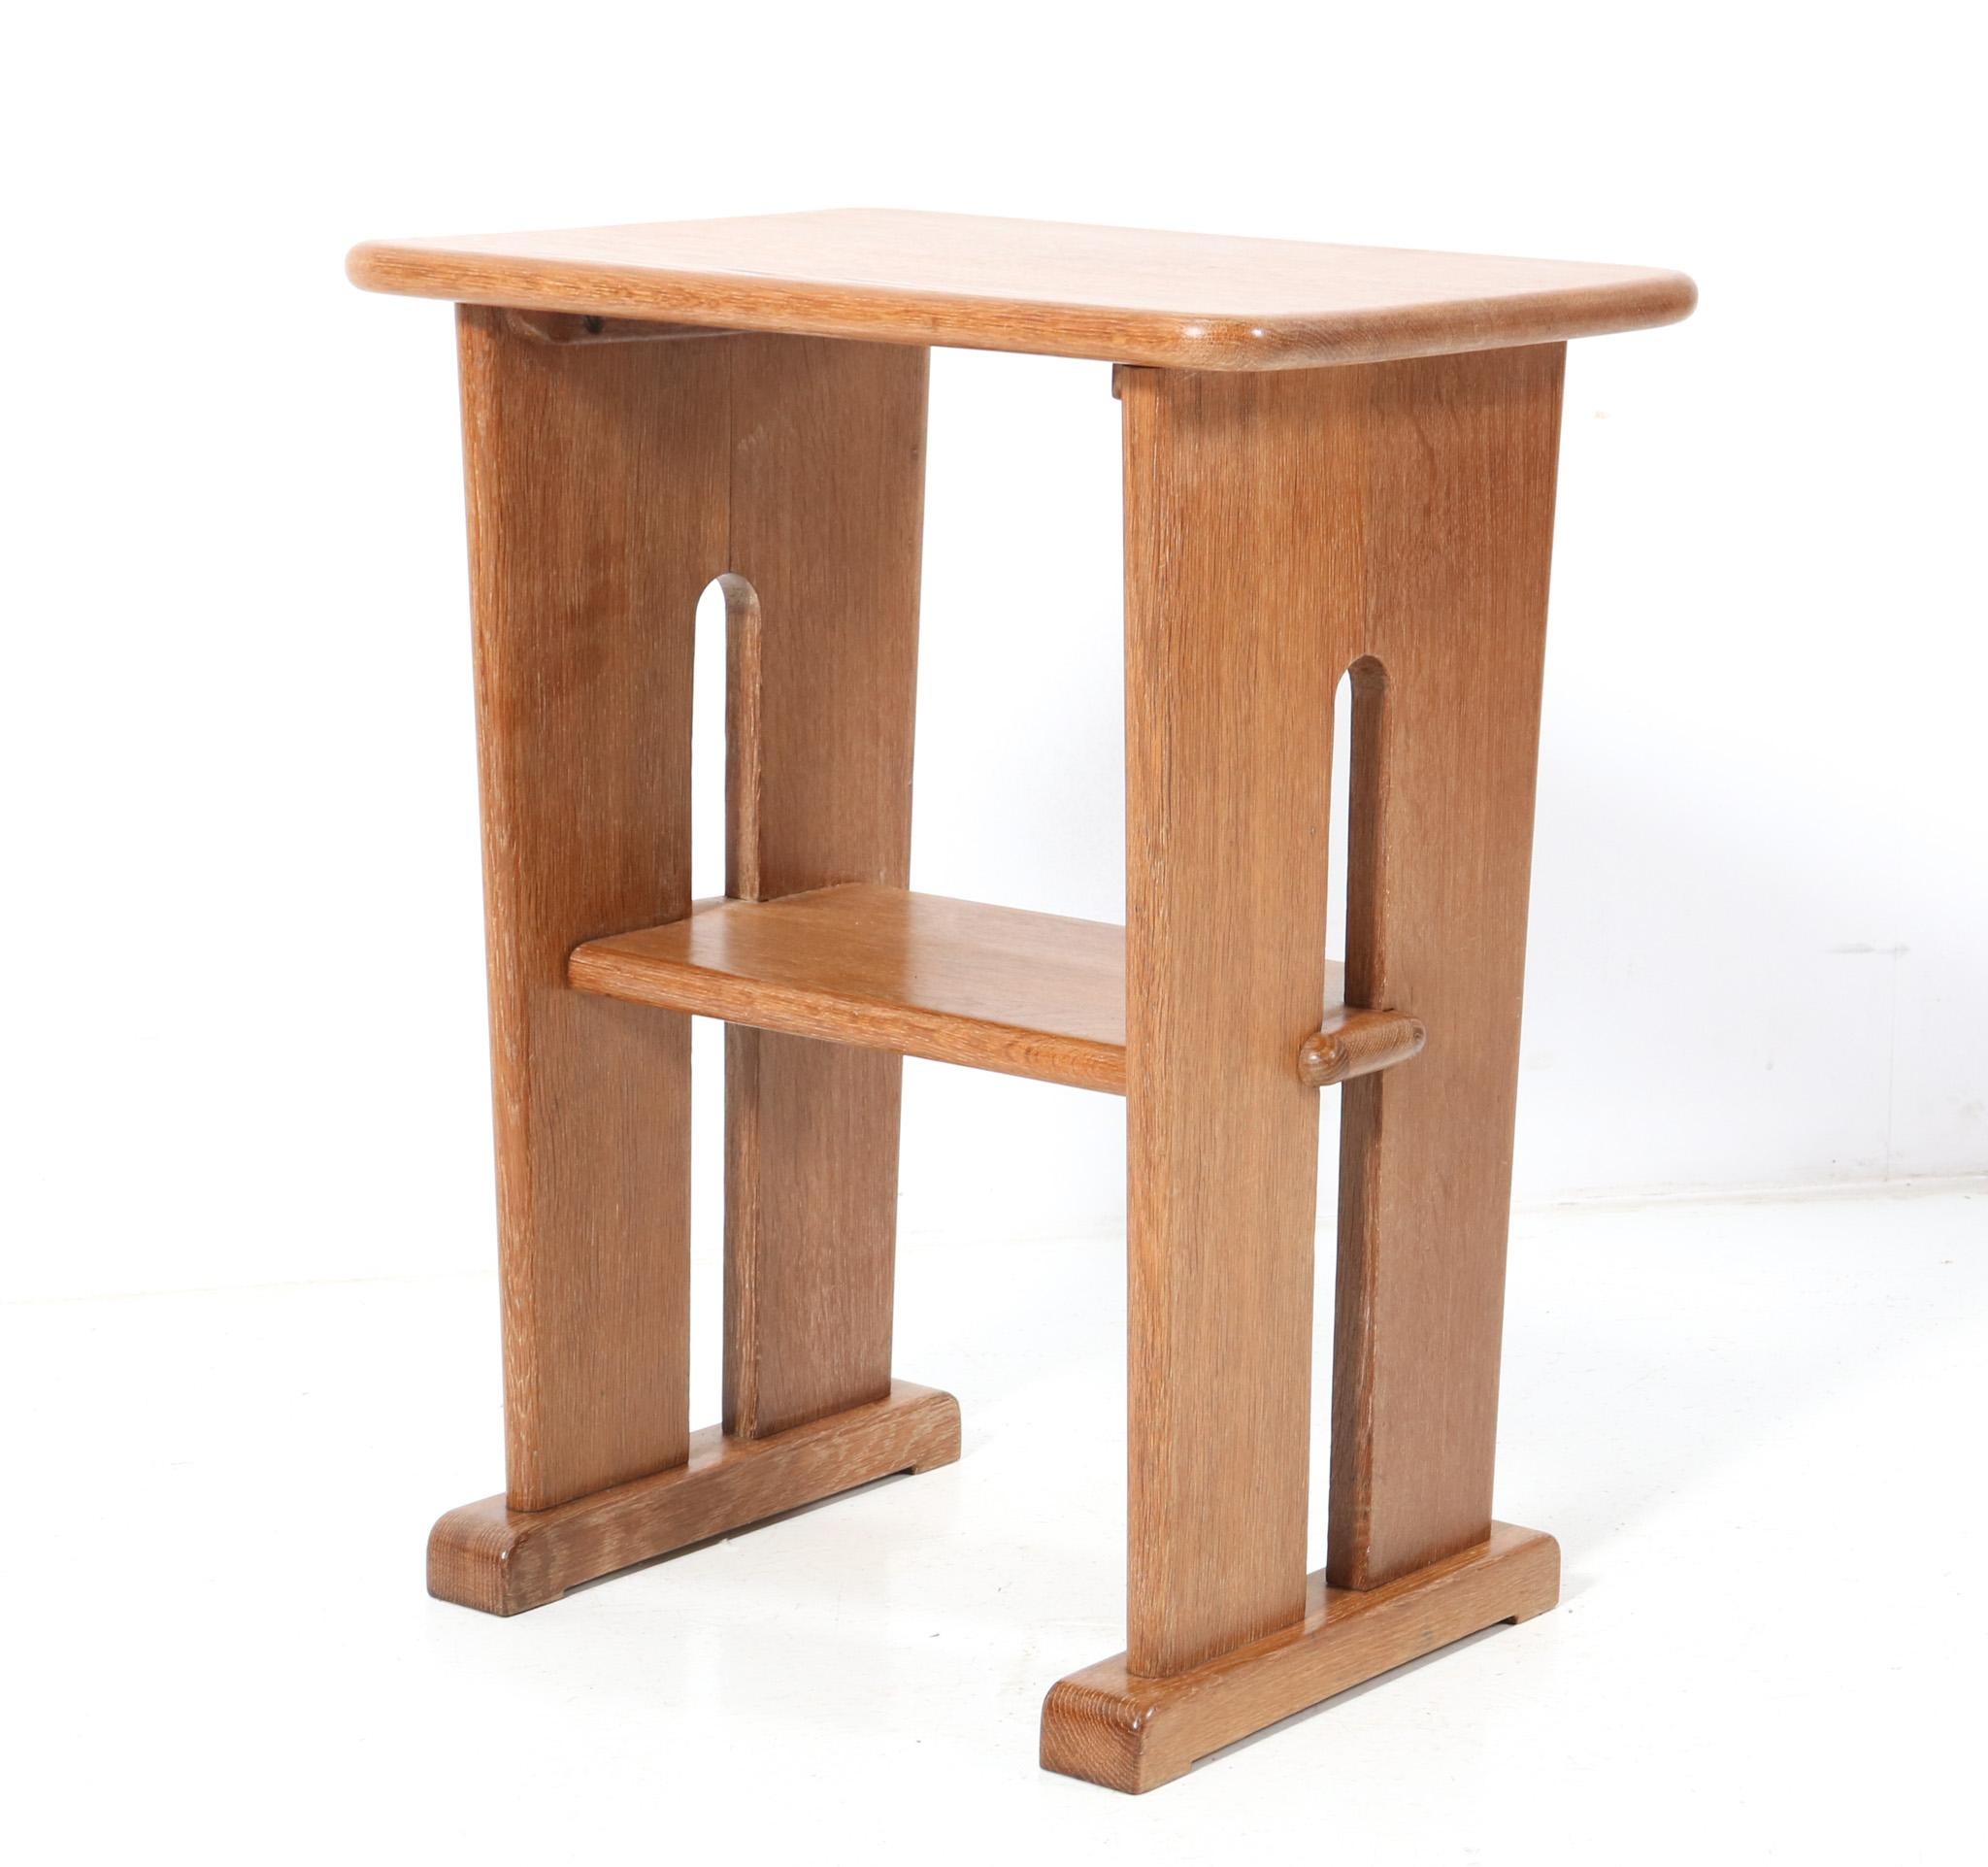 Oak Art Deco Modernist Side Table by Bas Van Pelt for My Home, 1930s In Good Condition For Sale In Amsterdam, NL